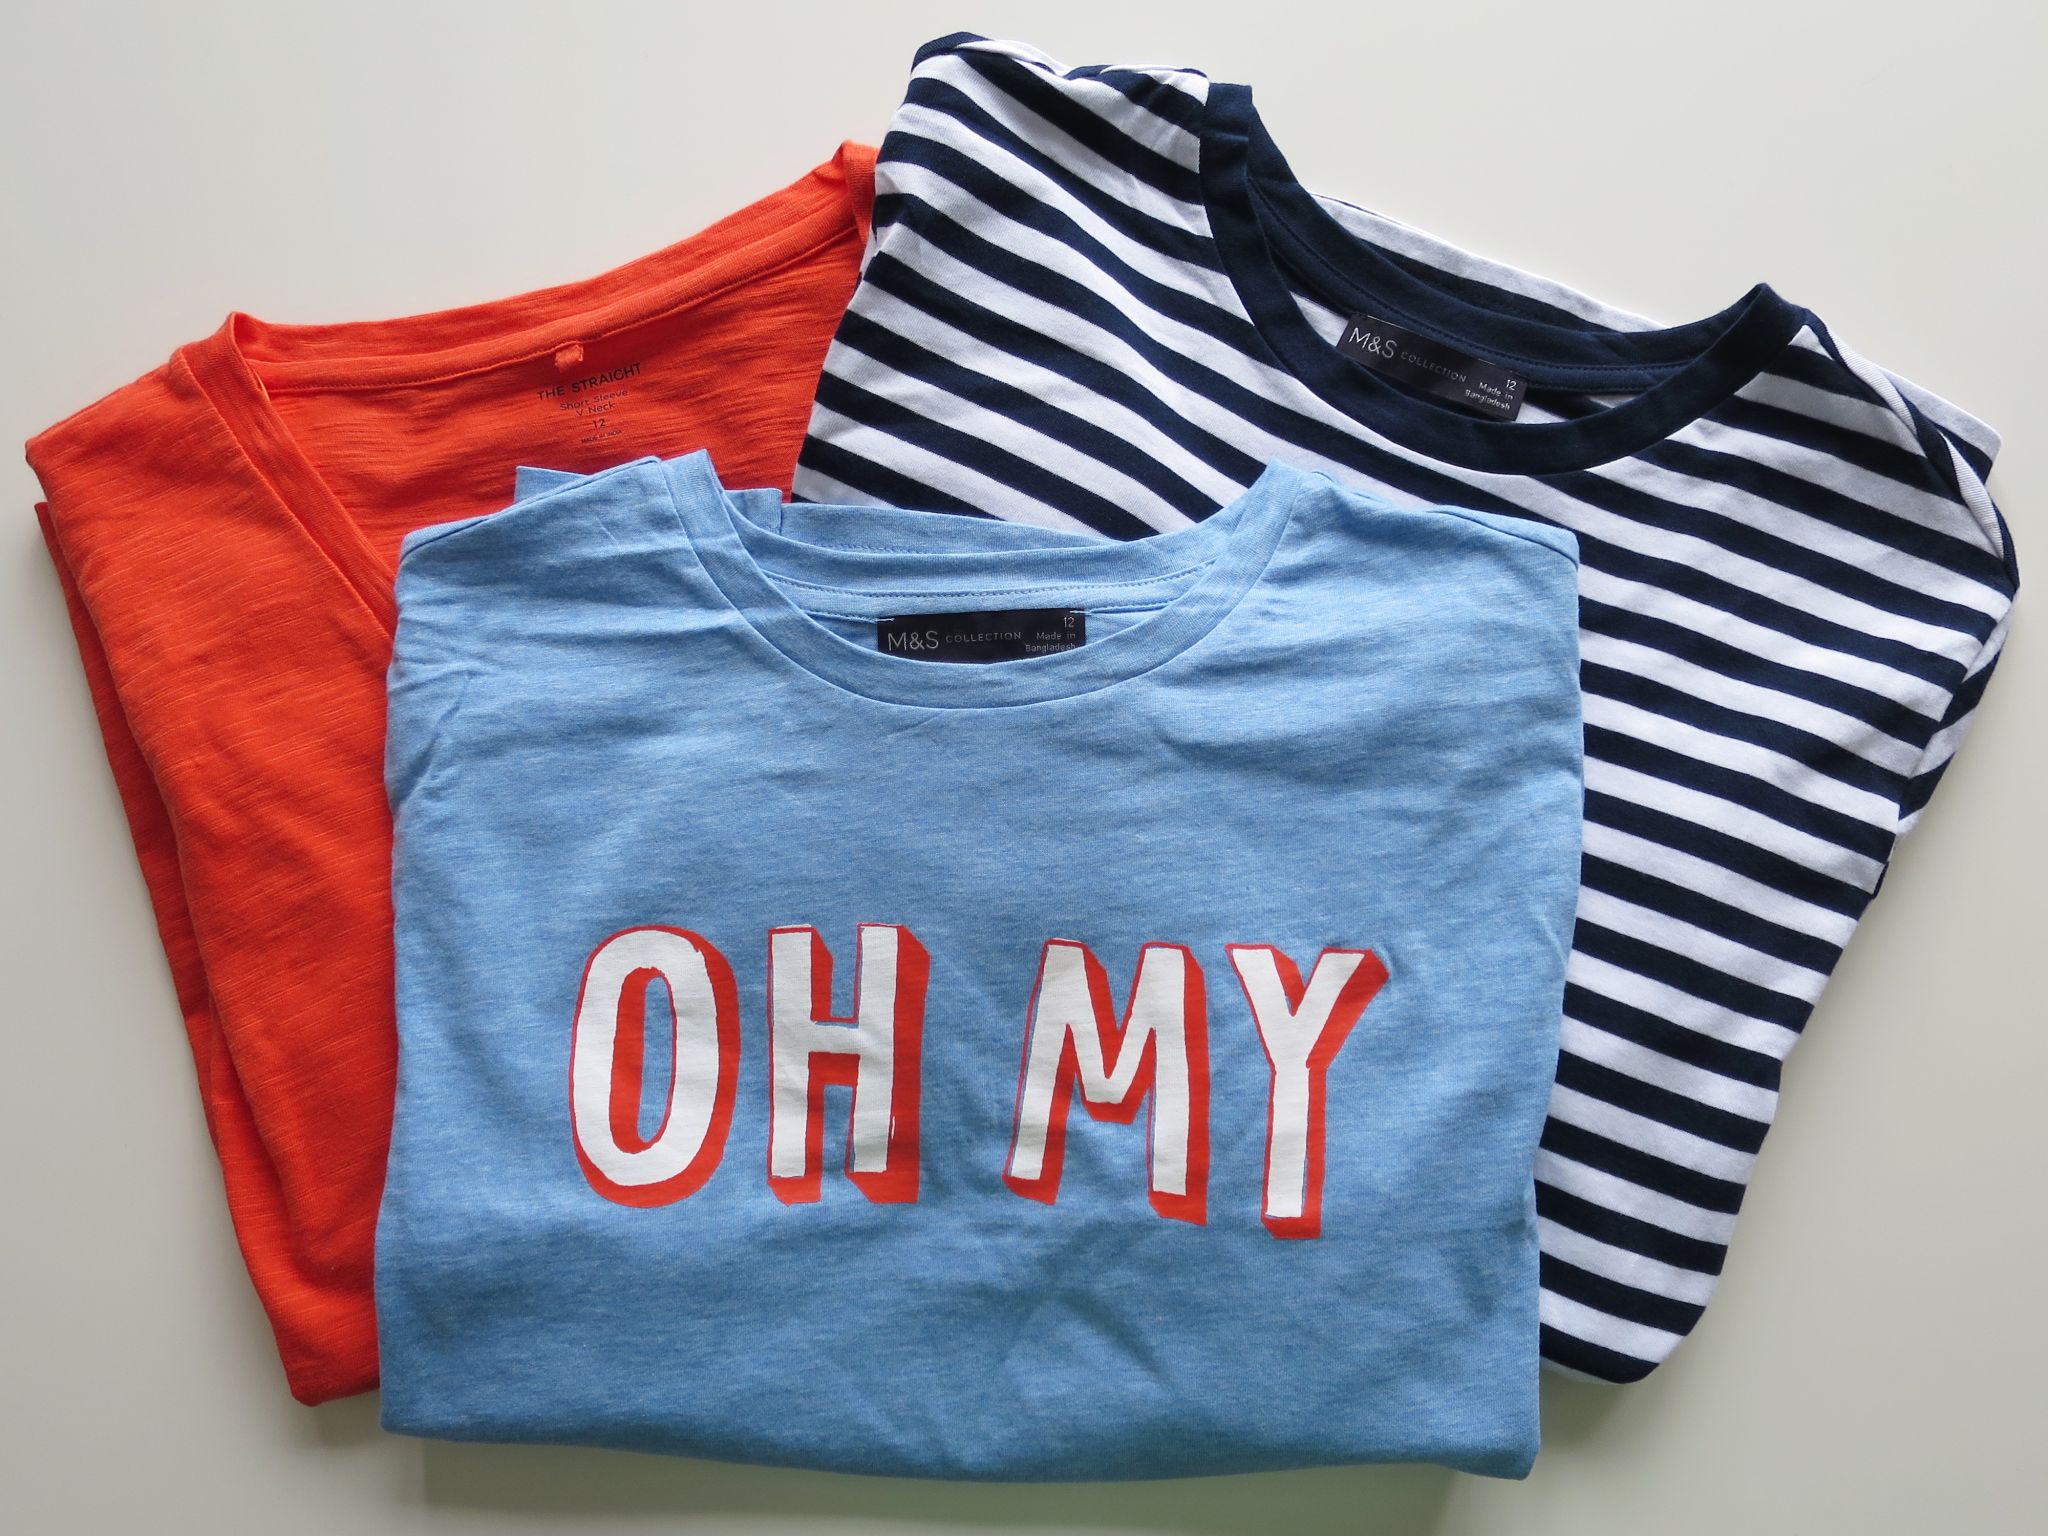 Marks and Spencer sustainable cotton tops - orange, stripey and blue with "oh my" written on the front